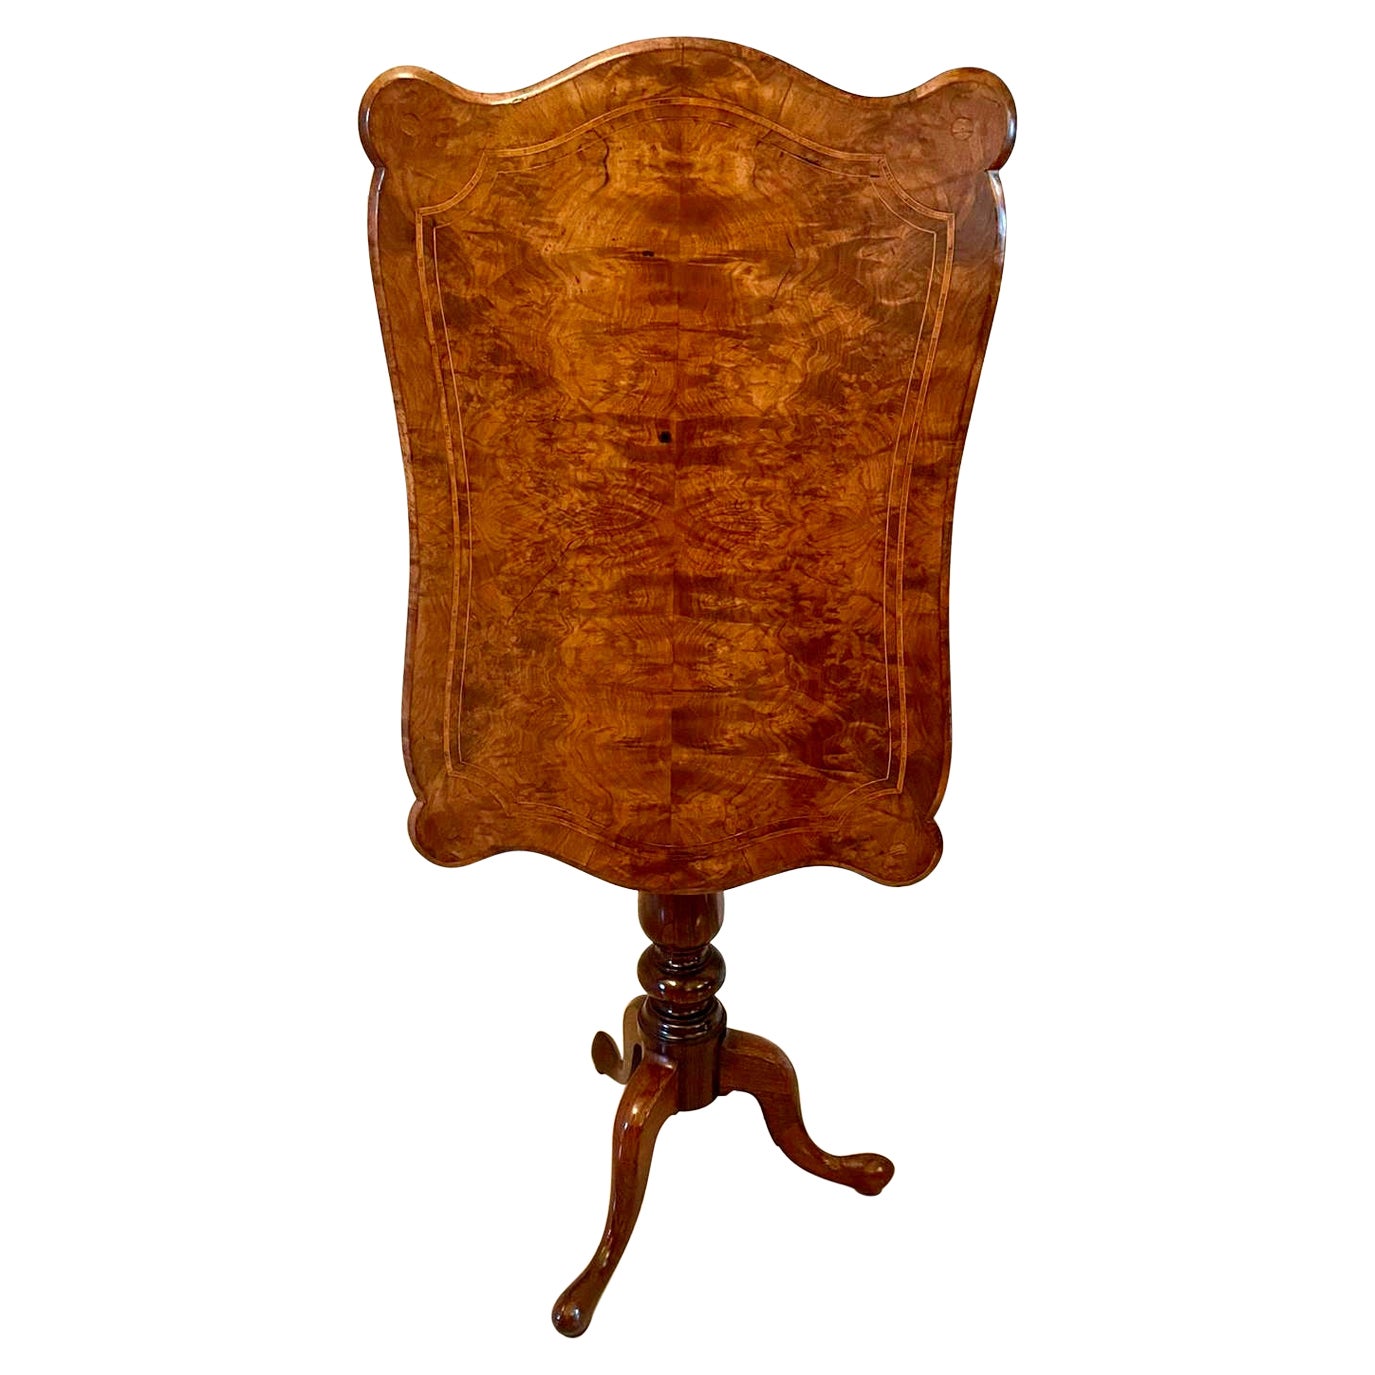 Quality Antique Victorian Inlaid Burr Walnut Lamp Table 